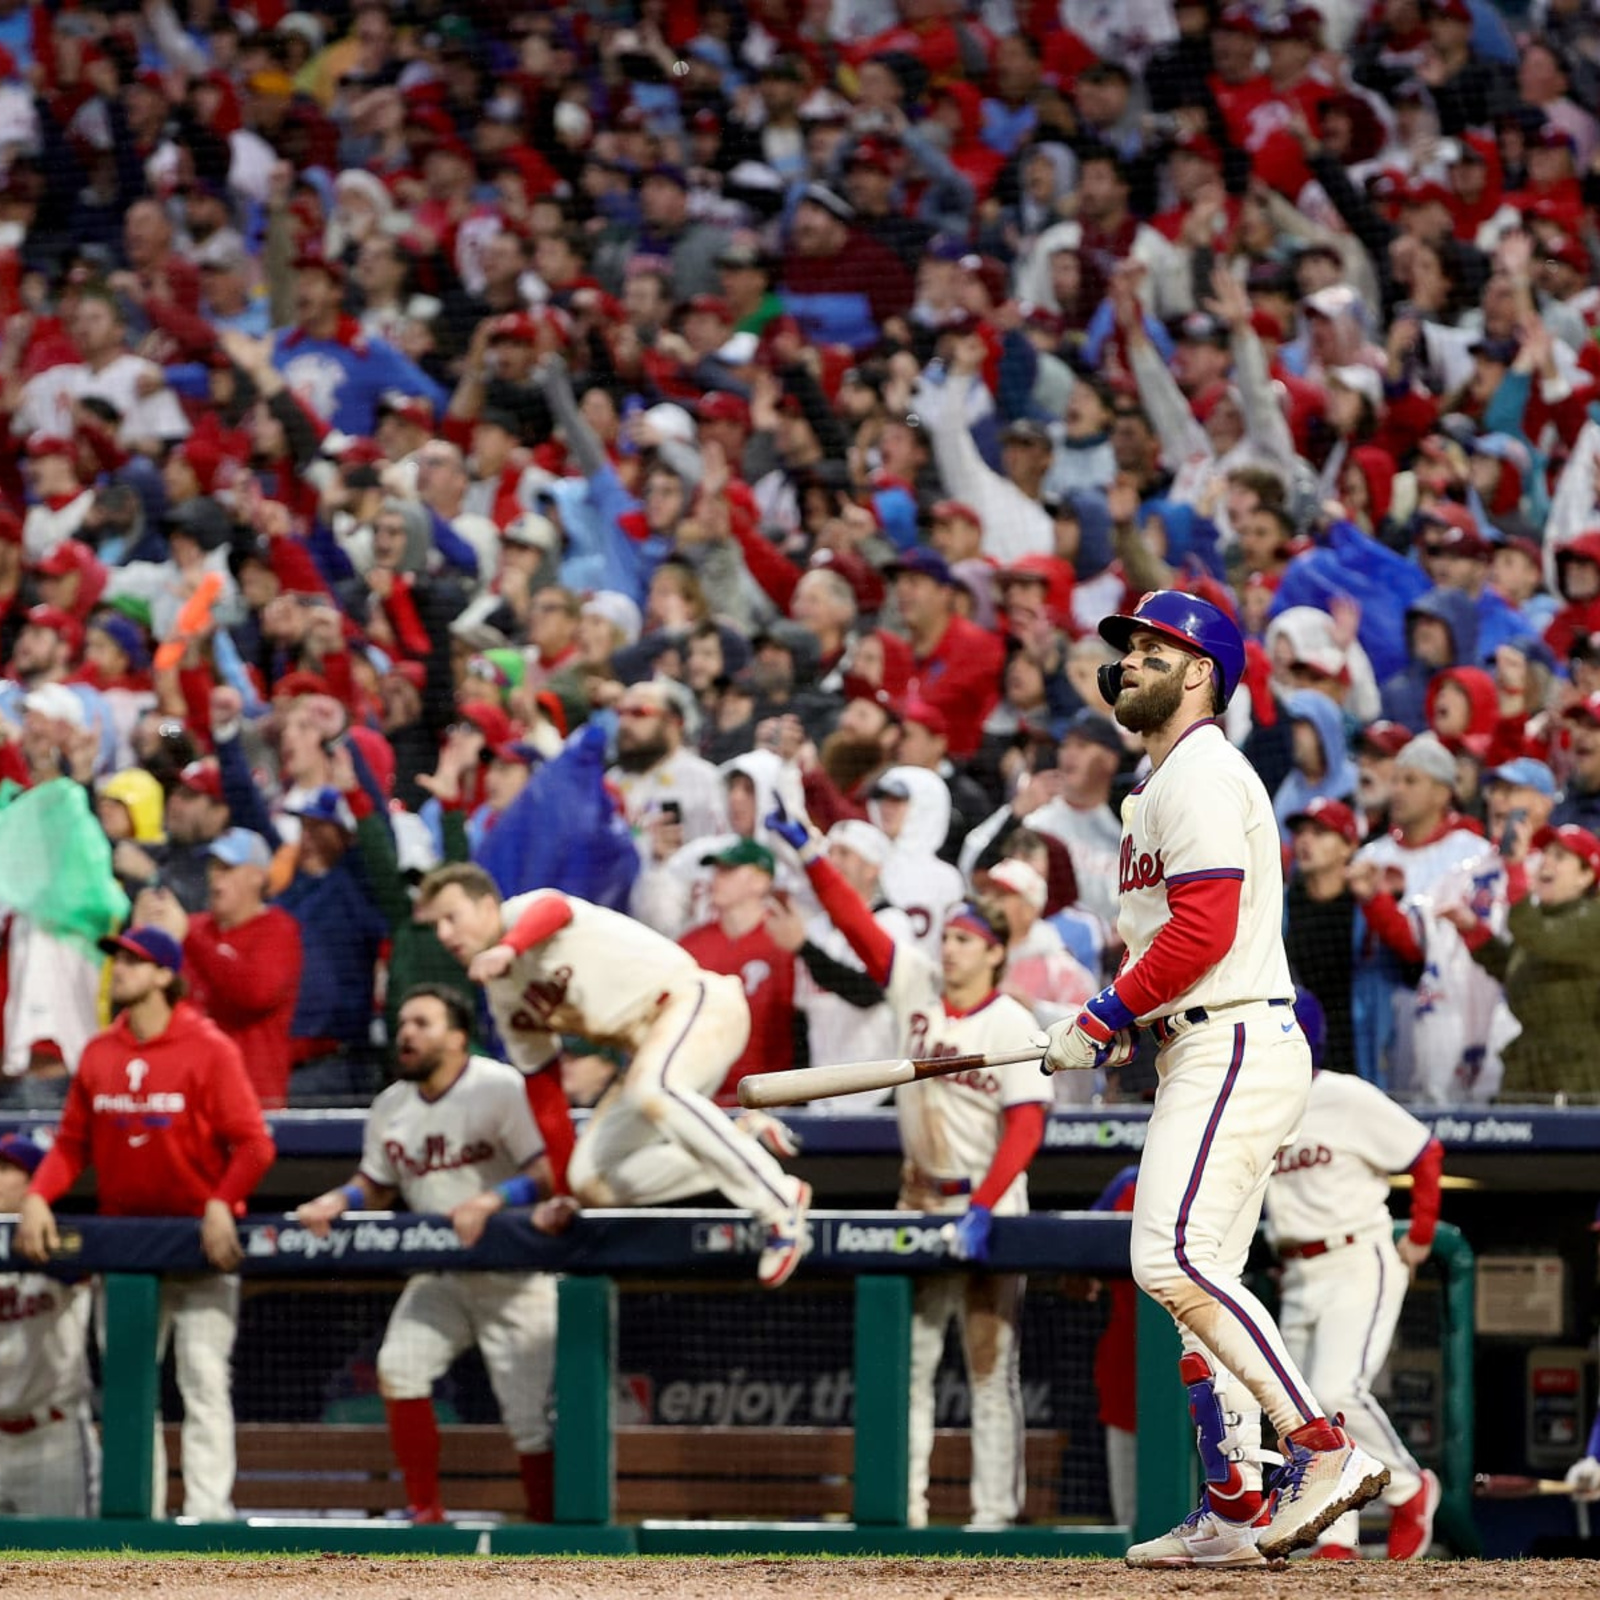 Phillies reportedly ask city of Philadelphia to allow some fans at